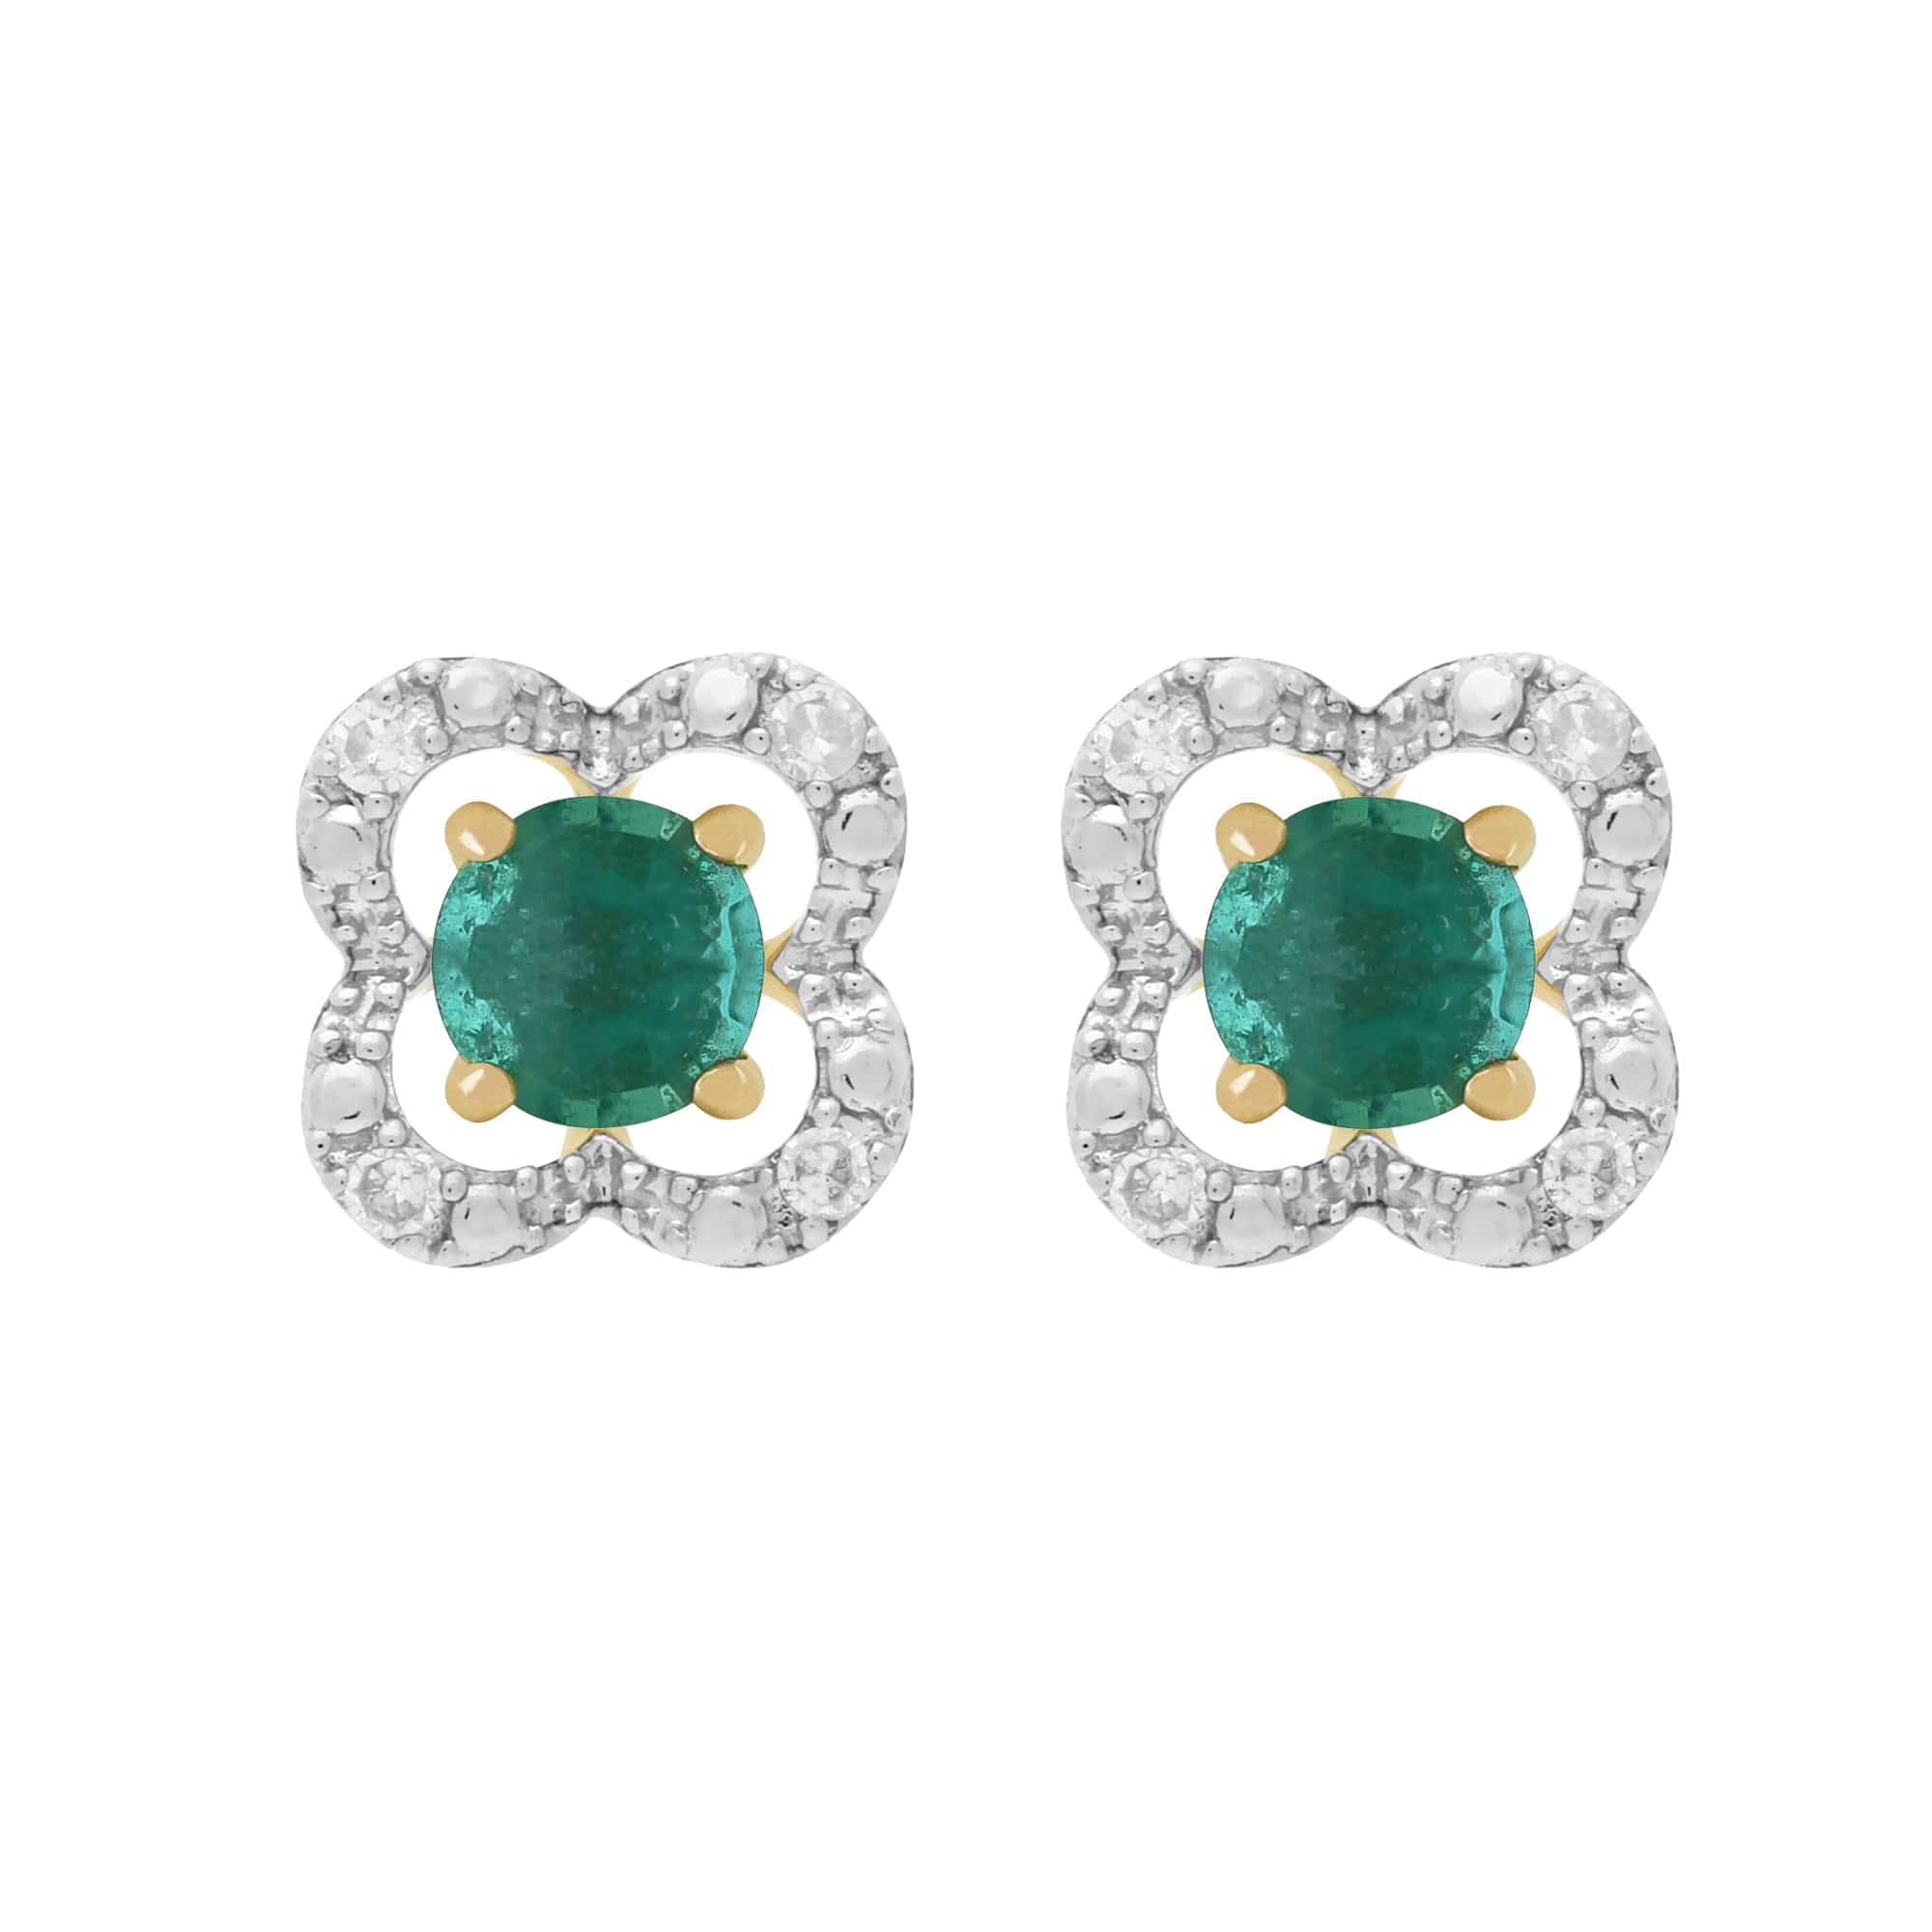 11569-191E0375019 Classic Round Emerald Stud Earrings with Detachable Diamond Floral Ear Jacket in 9ct Yellow Gold 1